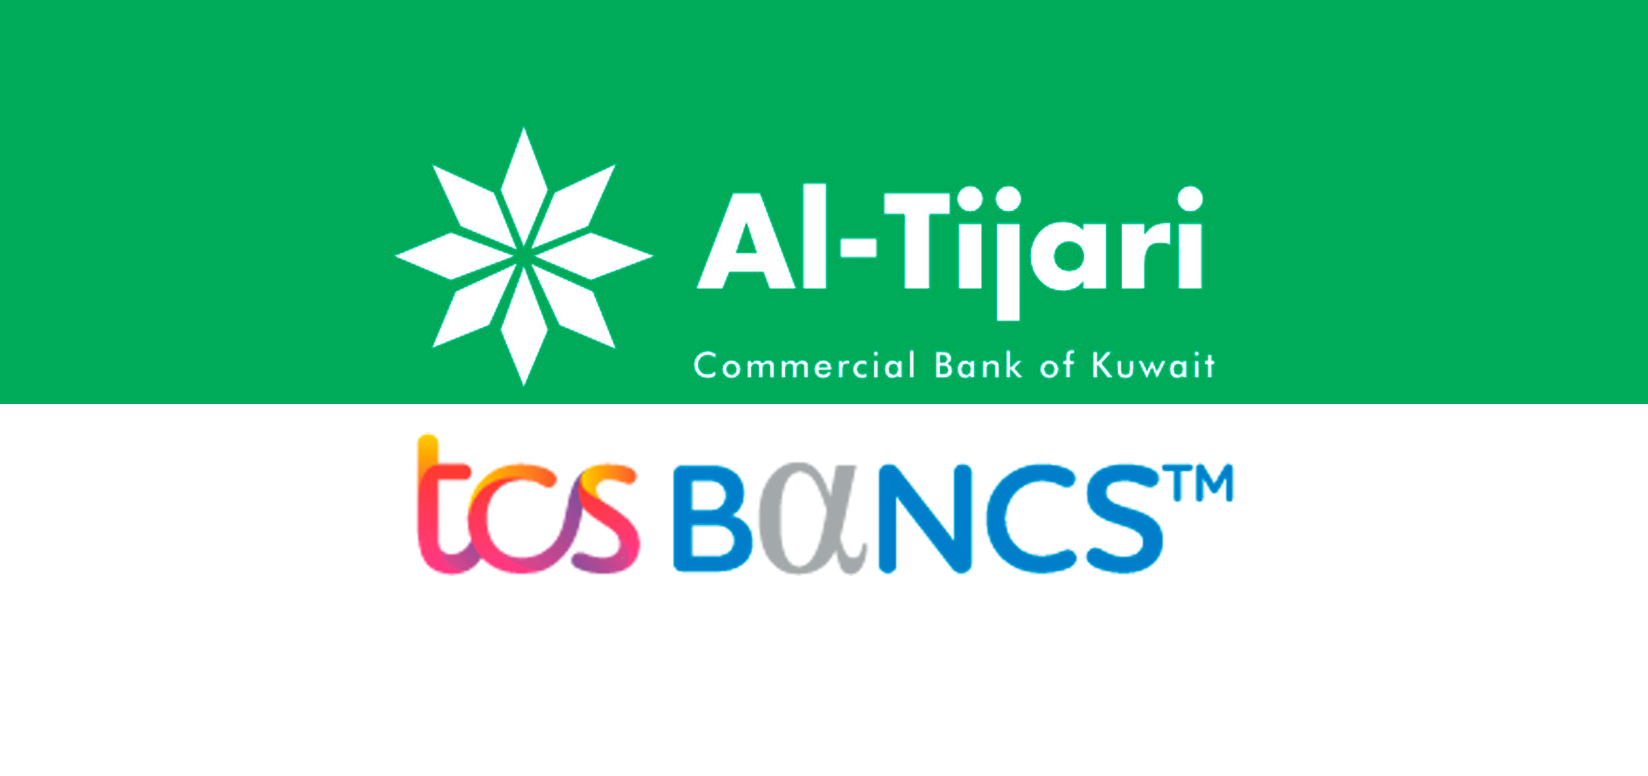 Commercial Bank of Kuwait Selects TCS BaNCS to Transform Treasury Operations and Drive Future Growth